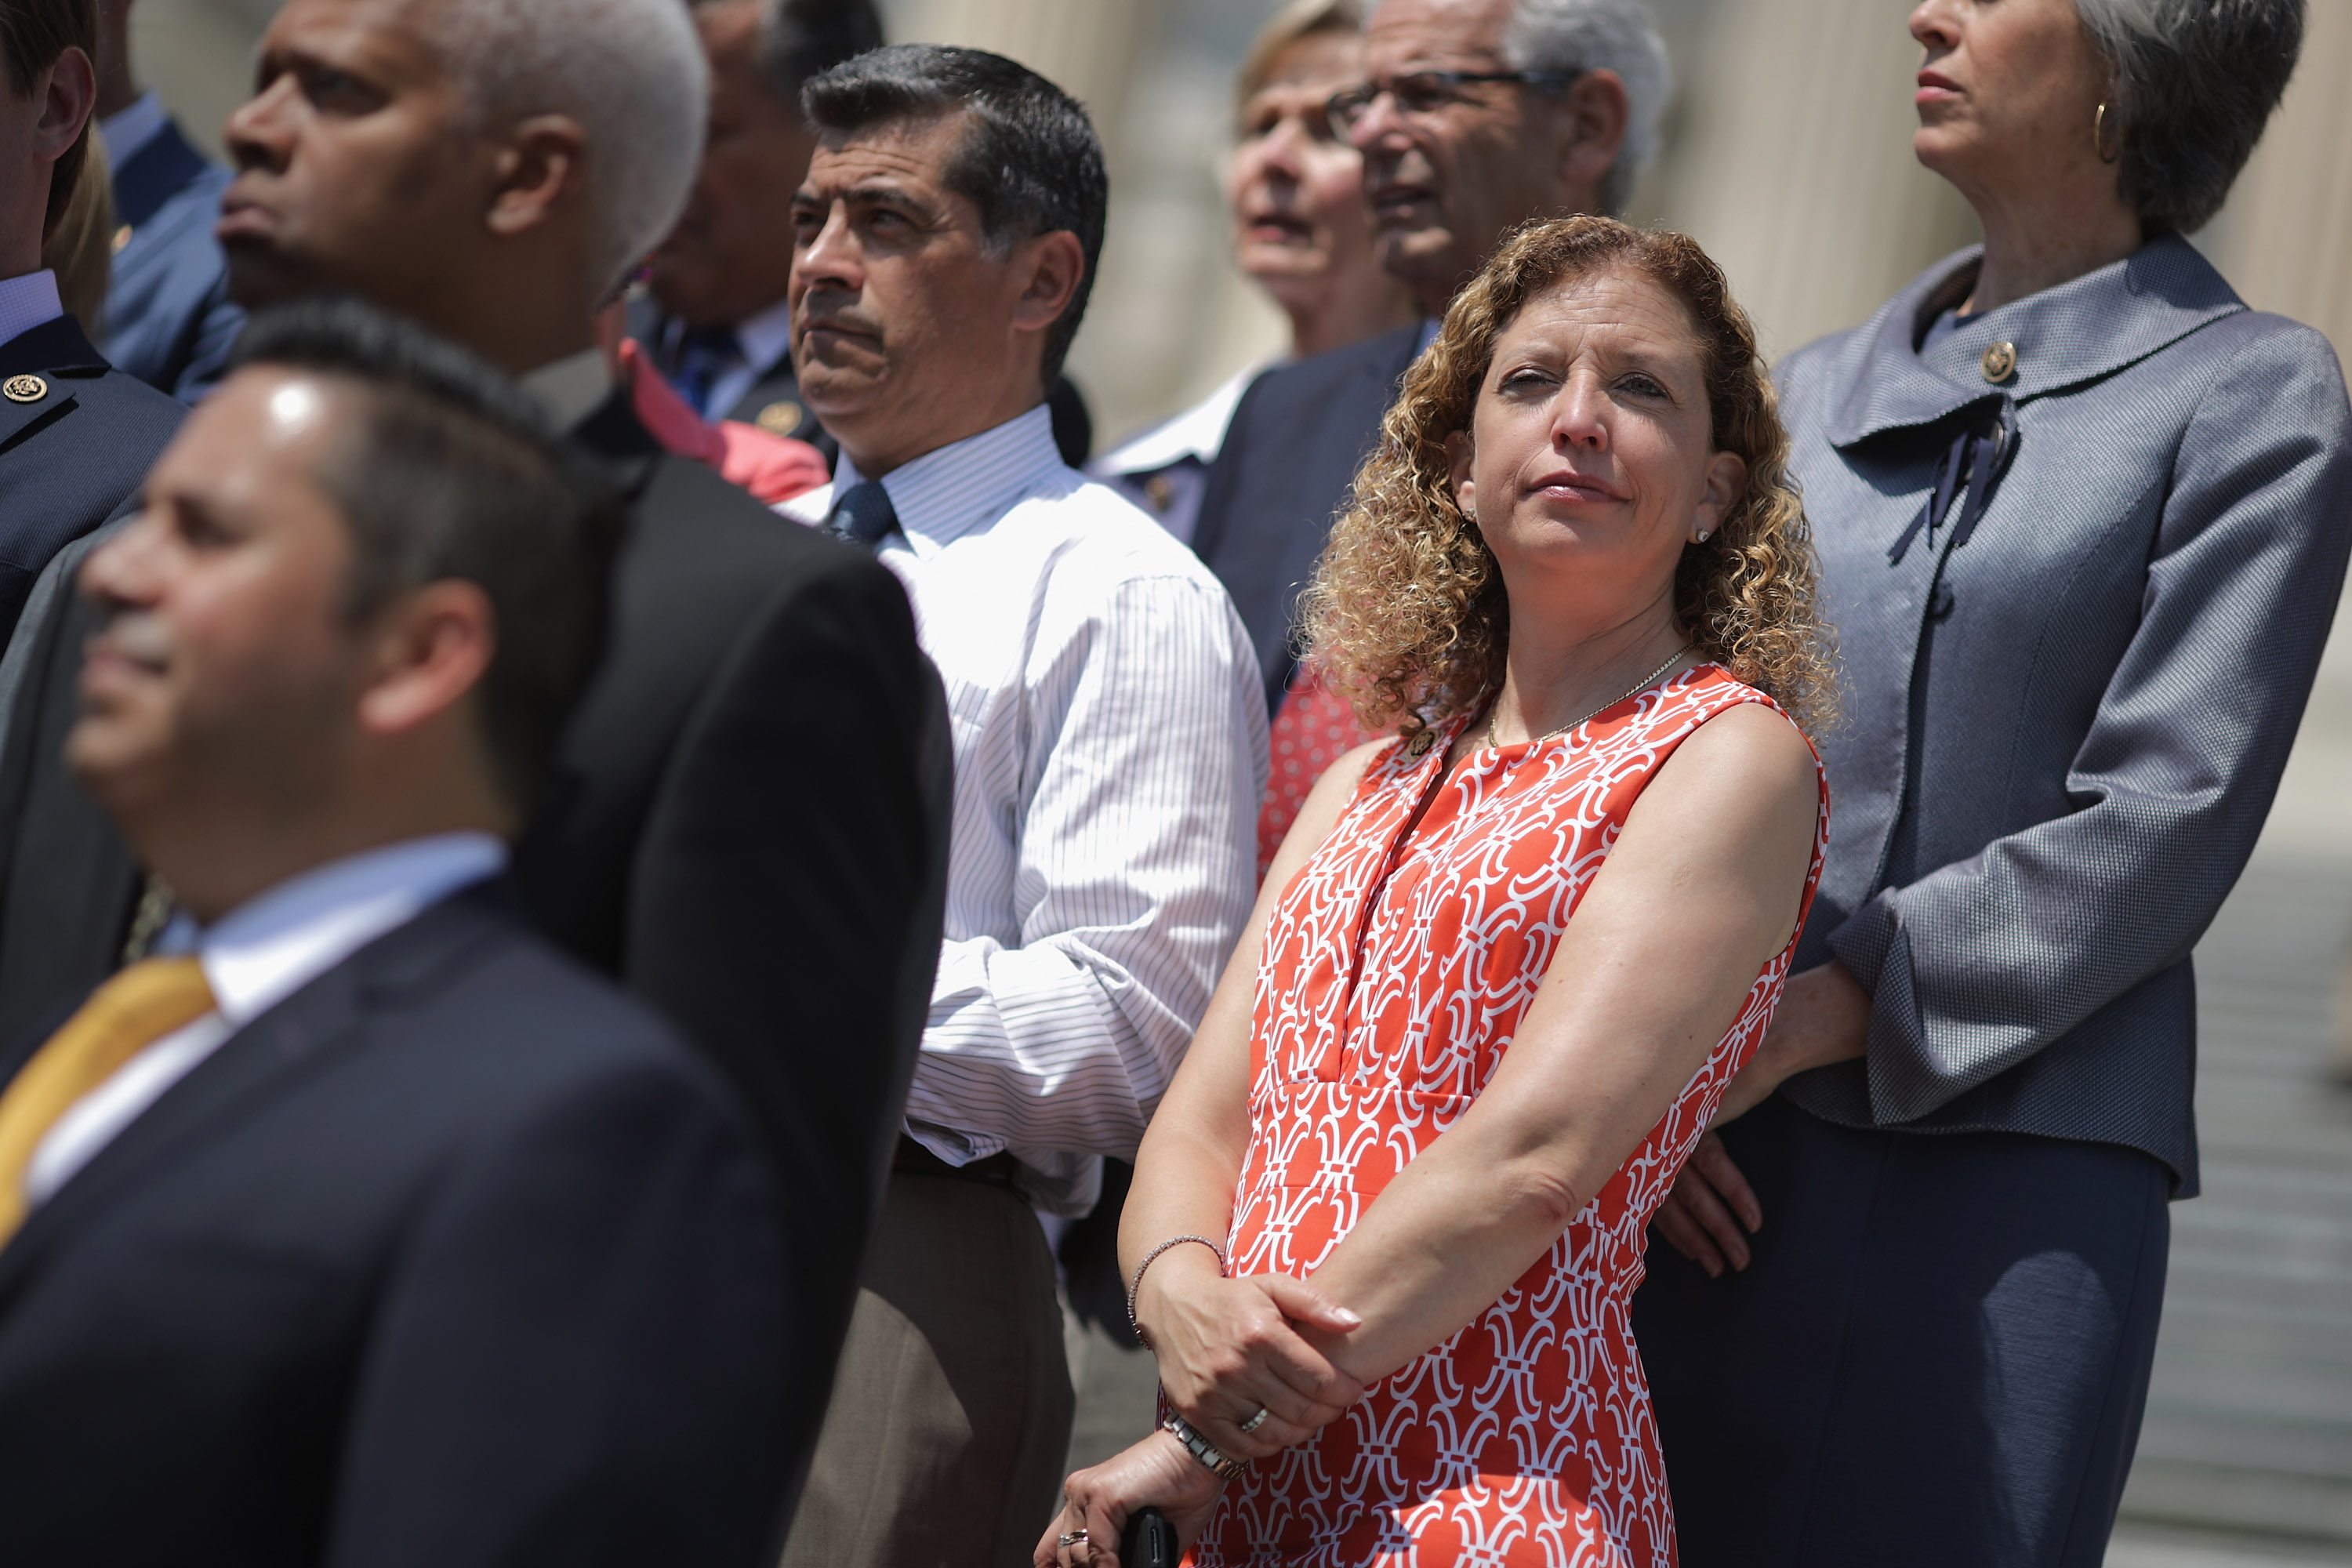 Democratic National Committee Chair Rep. Debbie Wasserman Shultz (D-FL) (C) joins fellow congressional Democrats to call on Republicans to postpone the Memorial Day holiday recess on the steps of the House of Representatives at the U.S. Capitol May 26, 2016 in Washington, DC. Democratic presidential candidate Sen. Bernie Sanders' (D-VT) campaign manager said, 'I think someone else could play a more positive role' as chair of the DNC than Wasserman Schultz, sparking rumors of her being forced from the position. 